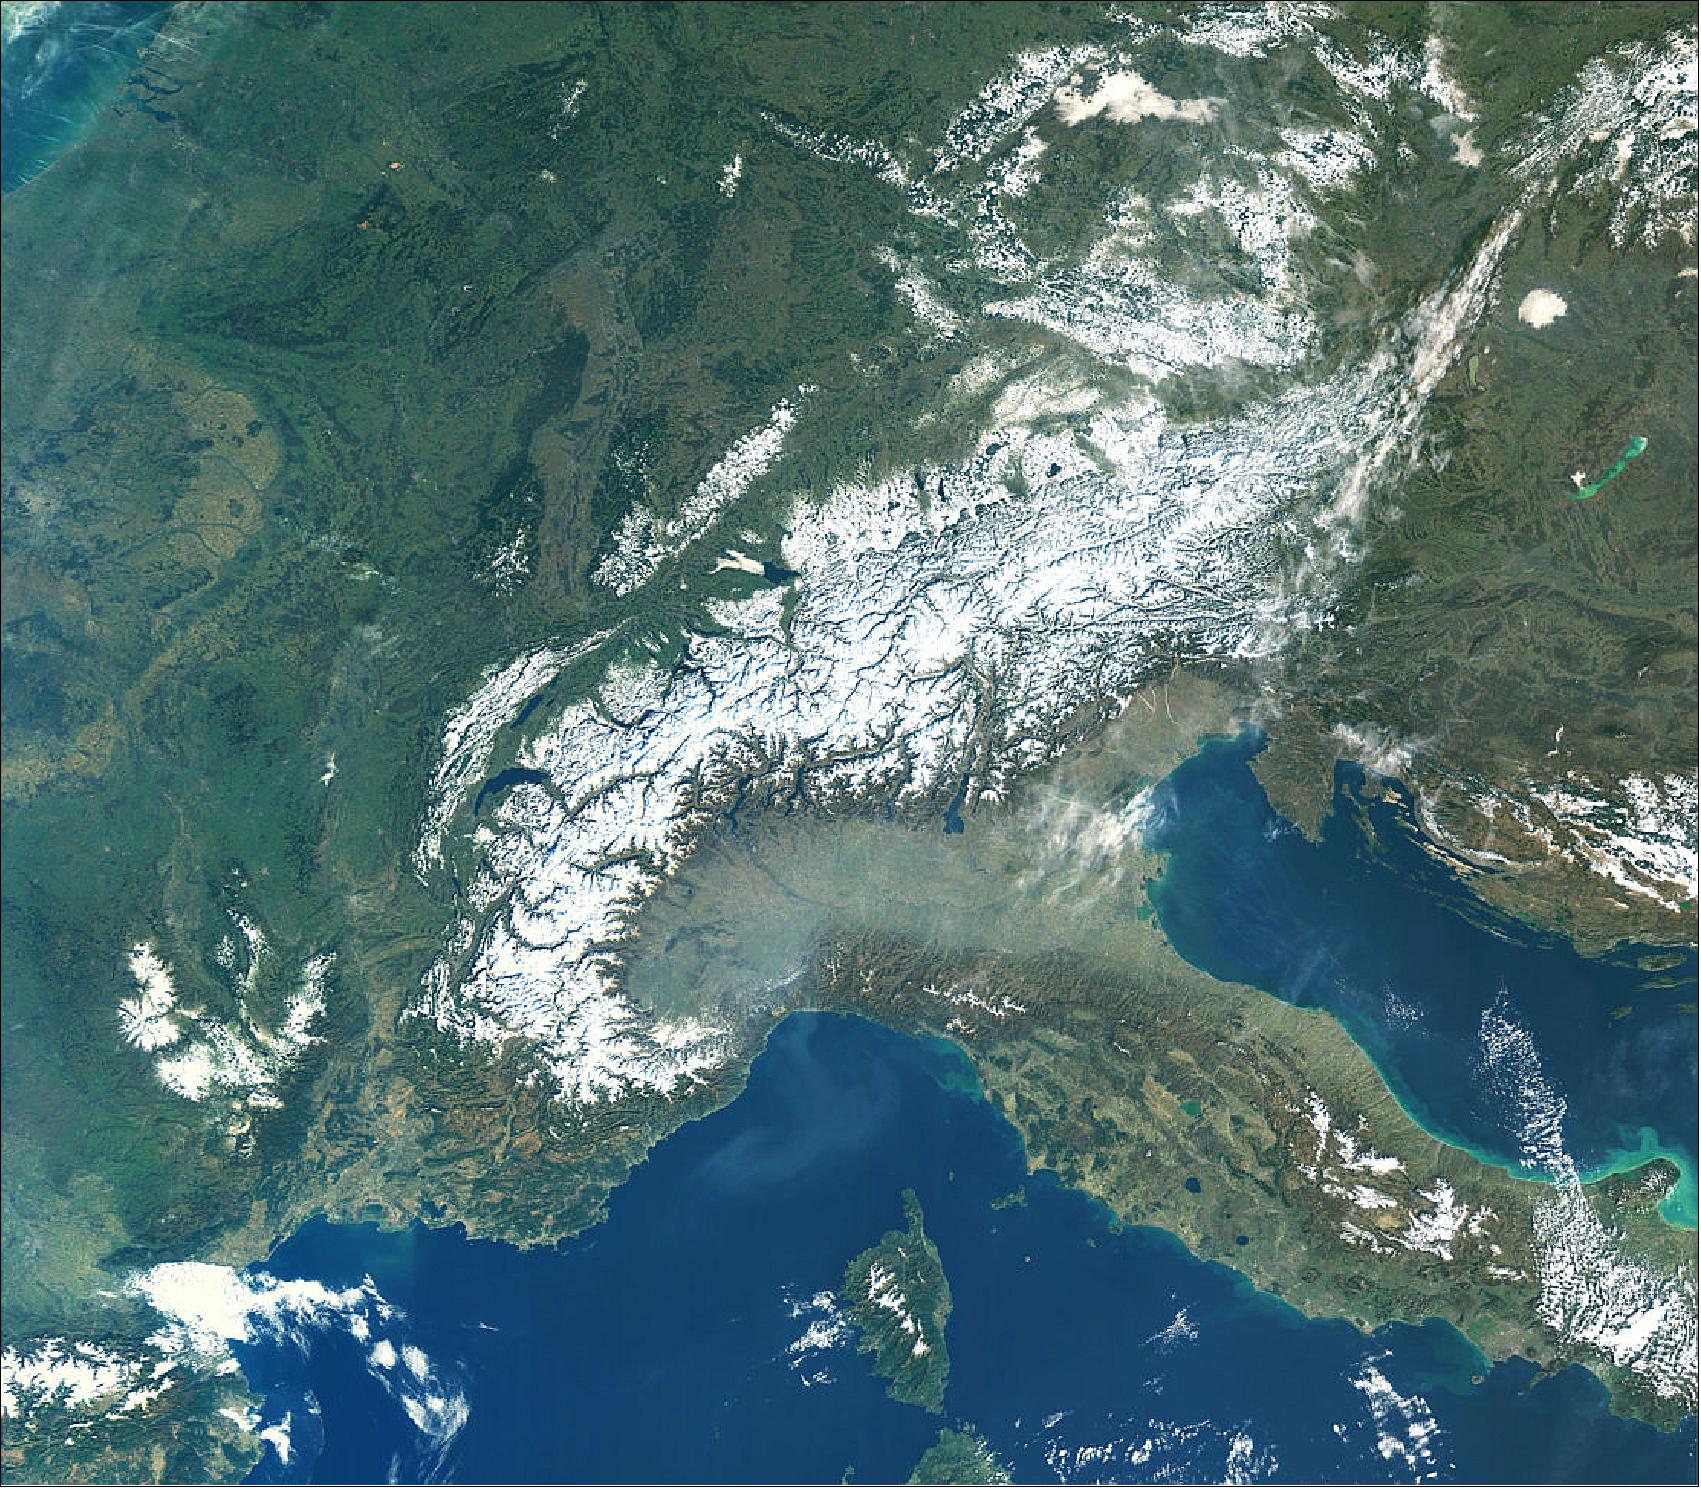 Figure 21: Captured on 16 February 2019 with Sentinel-3A, this true-color image shows little clouds, particularly over the Alps and the surrounding flatter lands in southern France. There is an interesting contrast between this and the haze hanging over the Po valley in Italy, directly south of the Alps. The haze is most likely to be a mix of both fog and smog, trapped at the base of the Alps owing to both its topography and atmospheric conditions. This image is also featured on the Earth from Space video program (image credit: ESA, the image contains modified Copernicus Sentinel data (2018), processed by ESA, CC BY-SA 3.0 IGO)